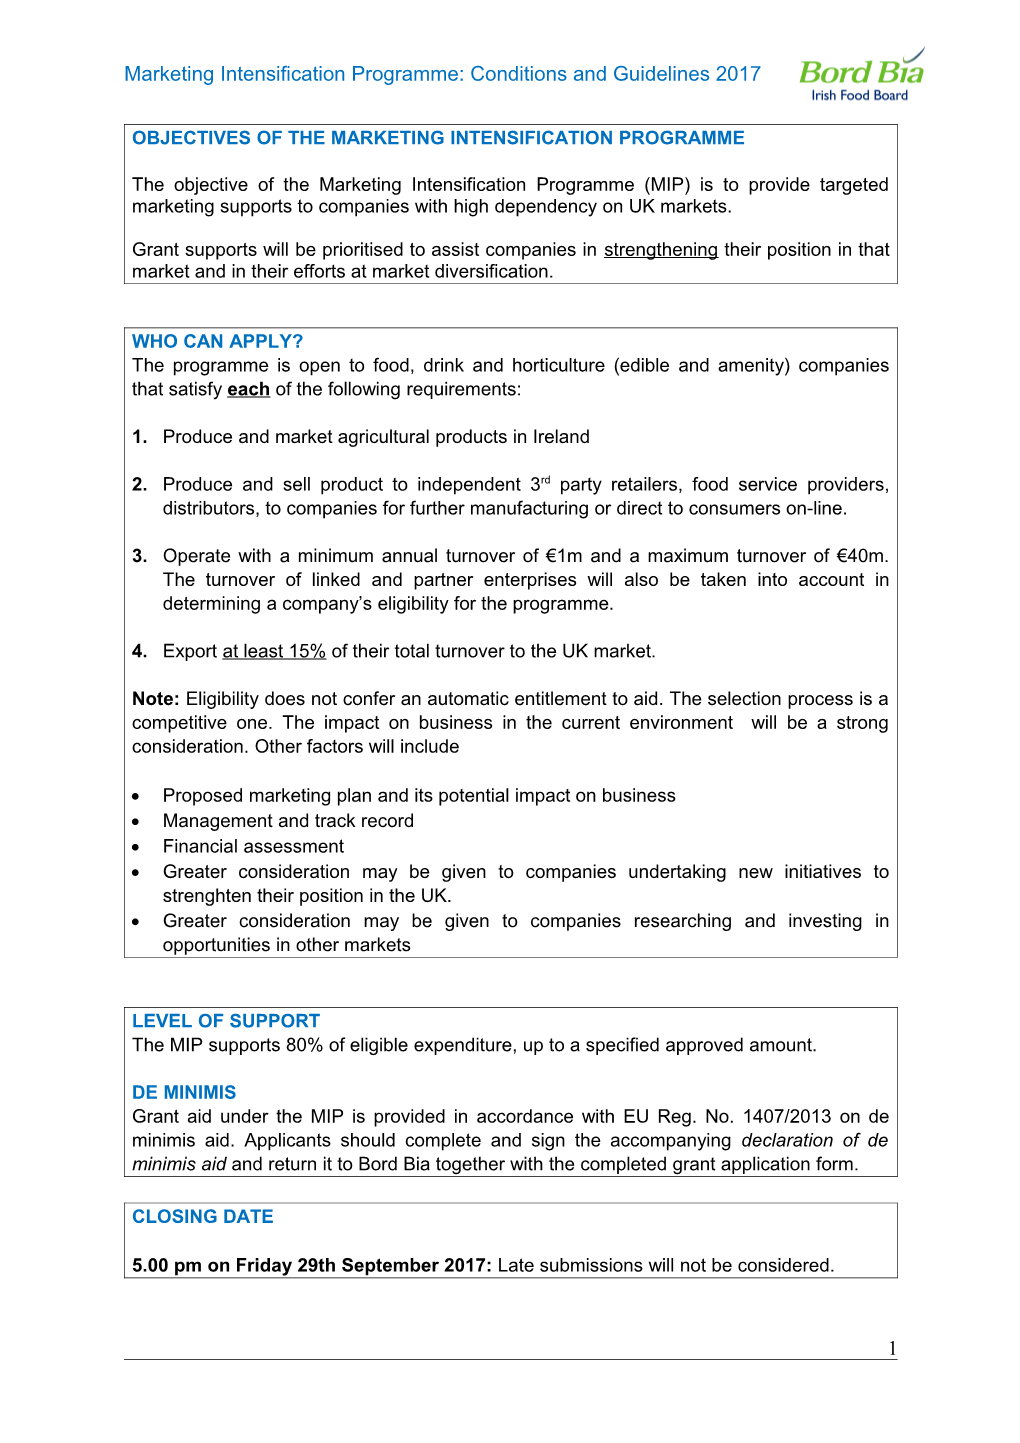 Objectives of the Marketing Intensification Programme